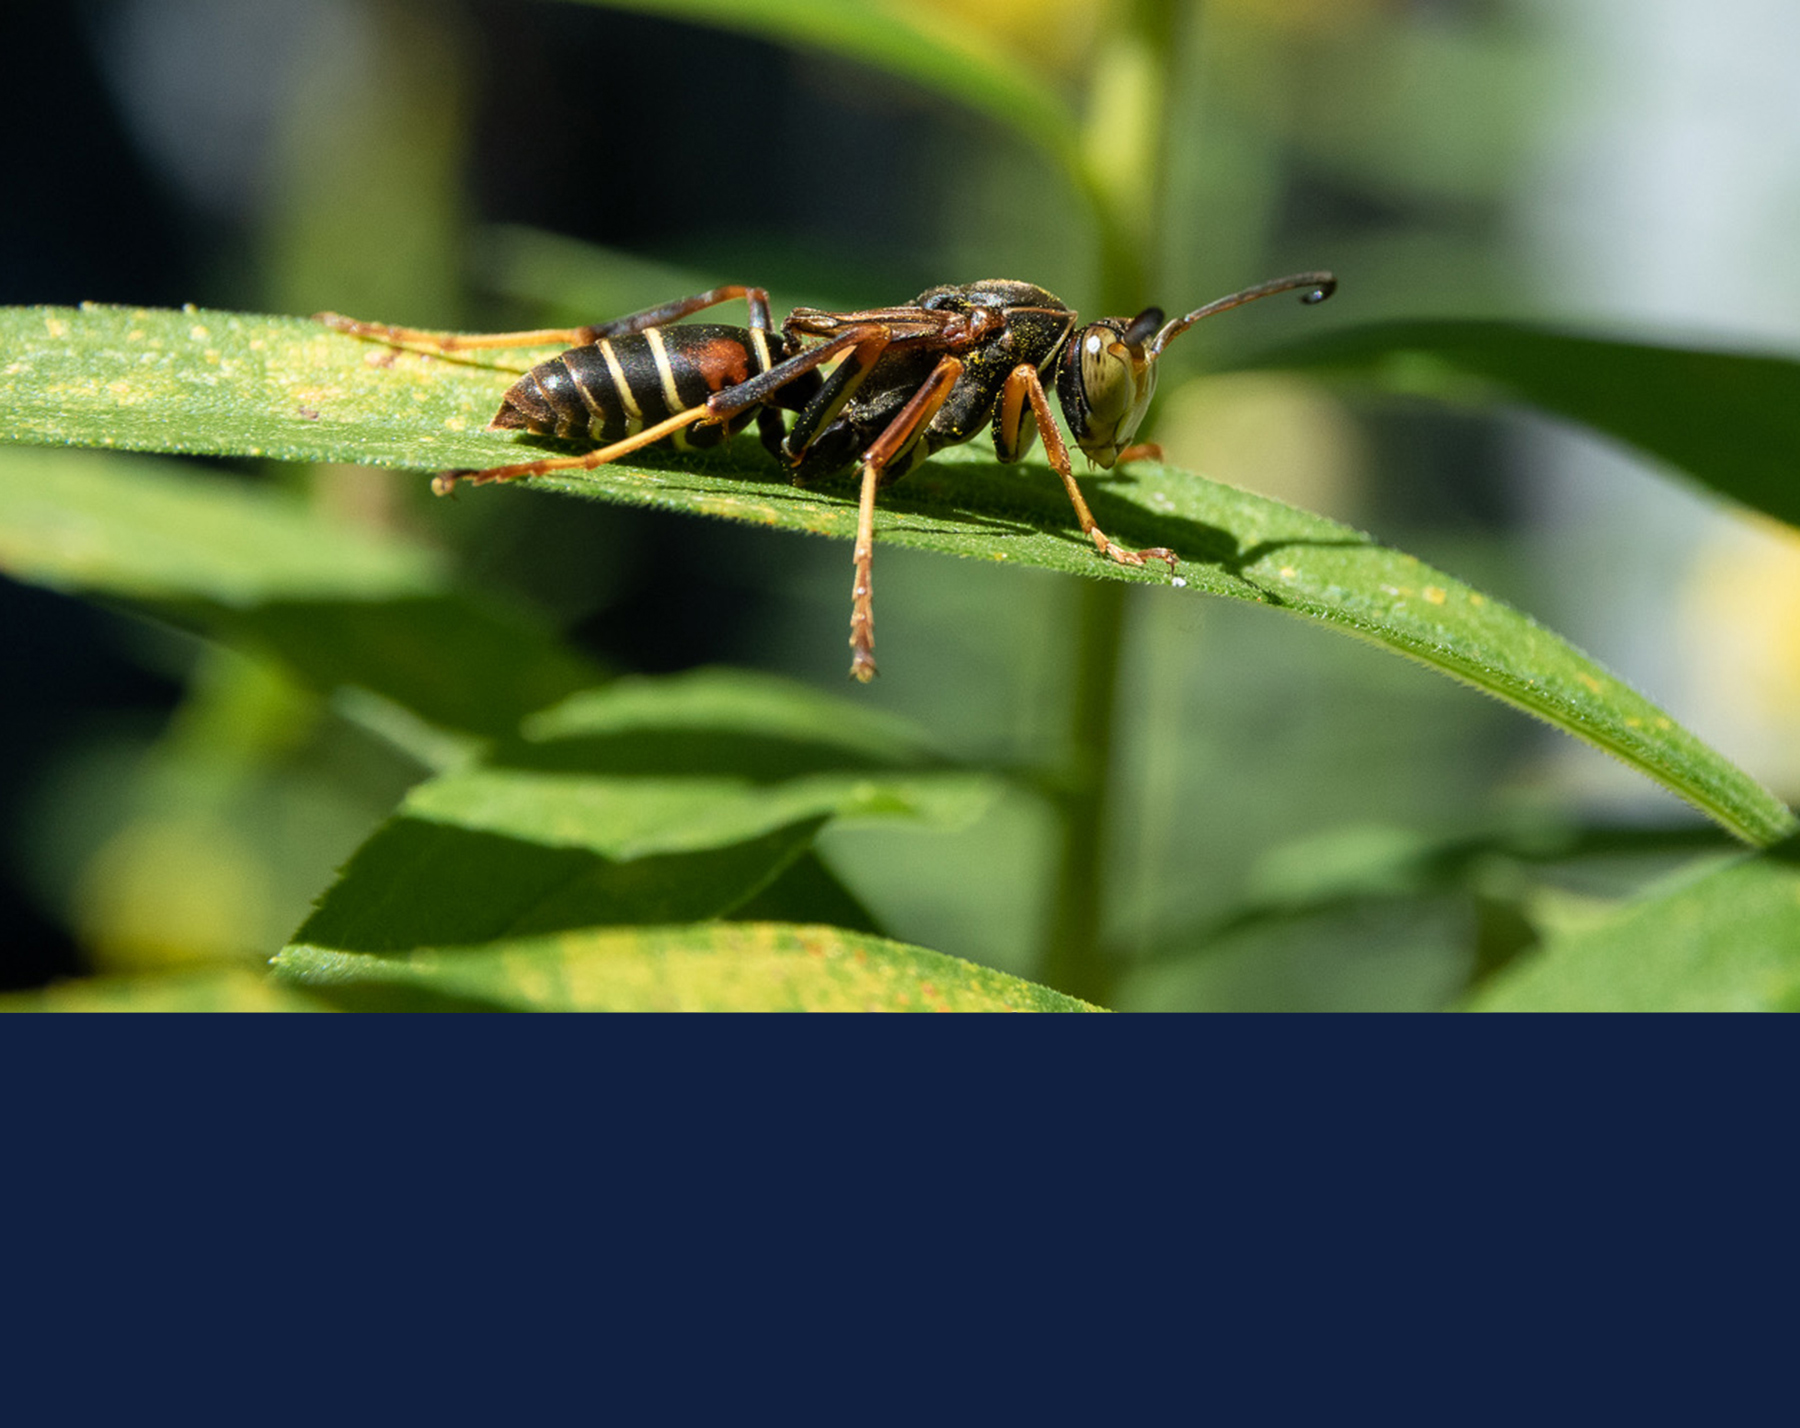 a paper wasp. Image by Edward M. Hsieh